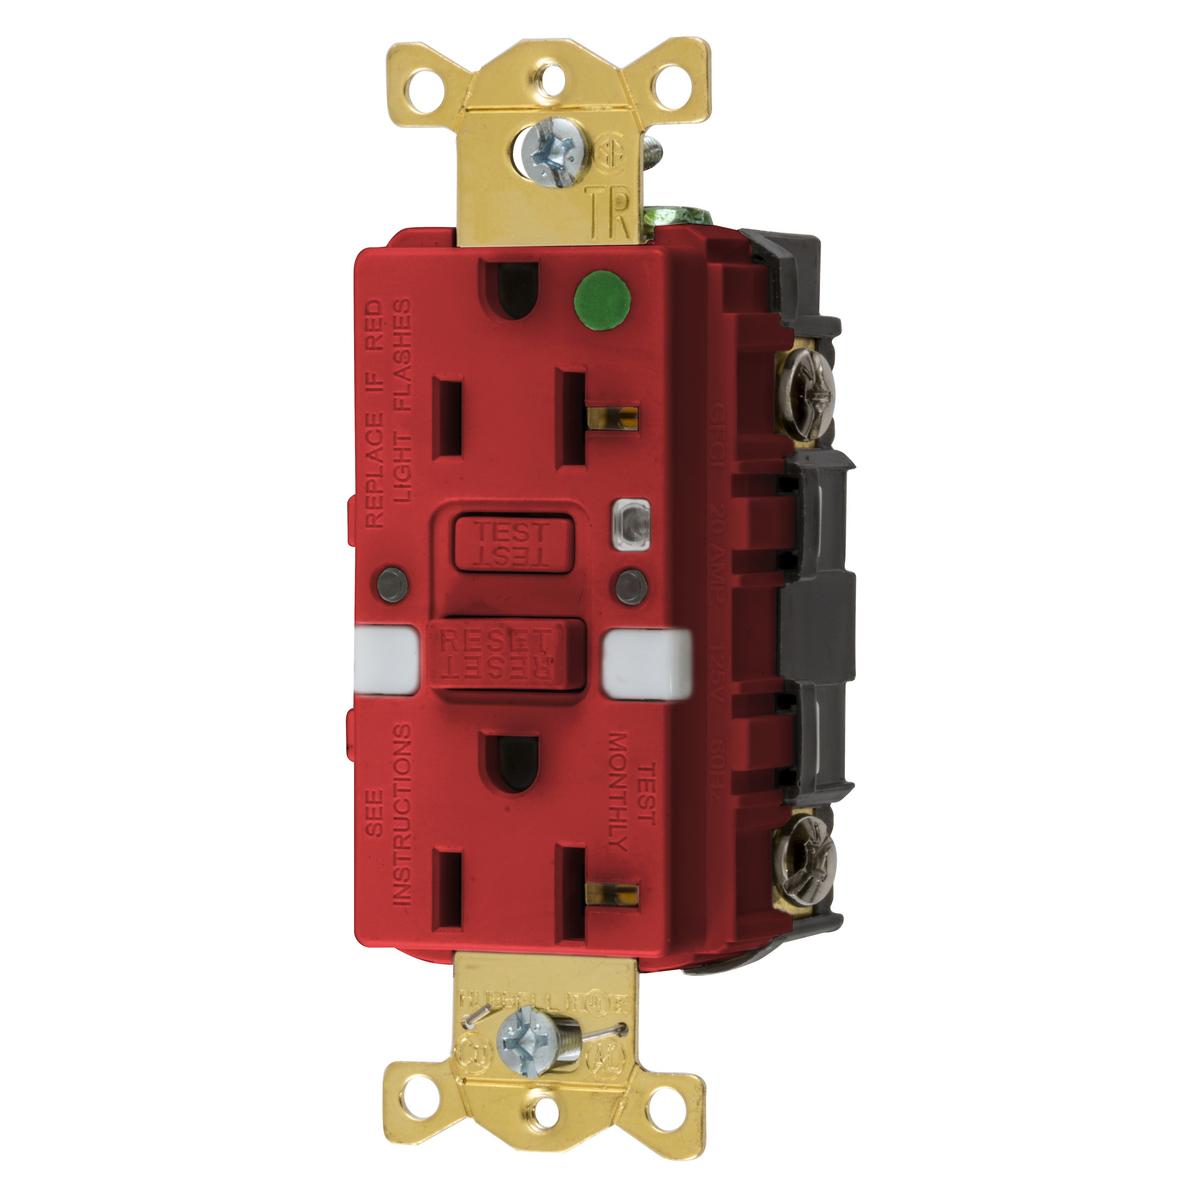 Hubbell GFTRST83RNL Straight Blade Devices, Receptacle, GFCI, Tamper Resistant, Commercial Hospital Grade, Self Test, 20A 125V, 2-Pole 3-Wire Grounding, 5-20R, Red, With Night Light.  ; Patented shutter design for tamper-resistant ; Compliant with NEC® 406.12 and NEC® 517-18